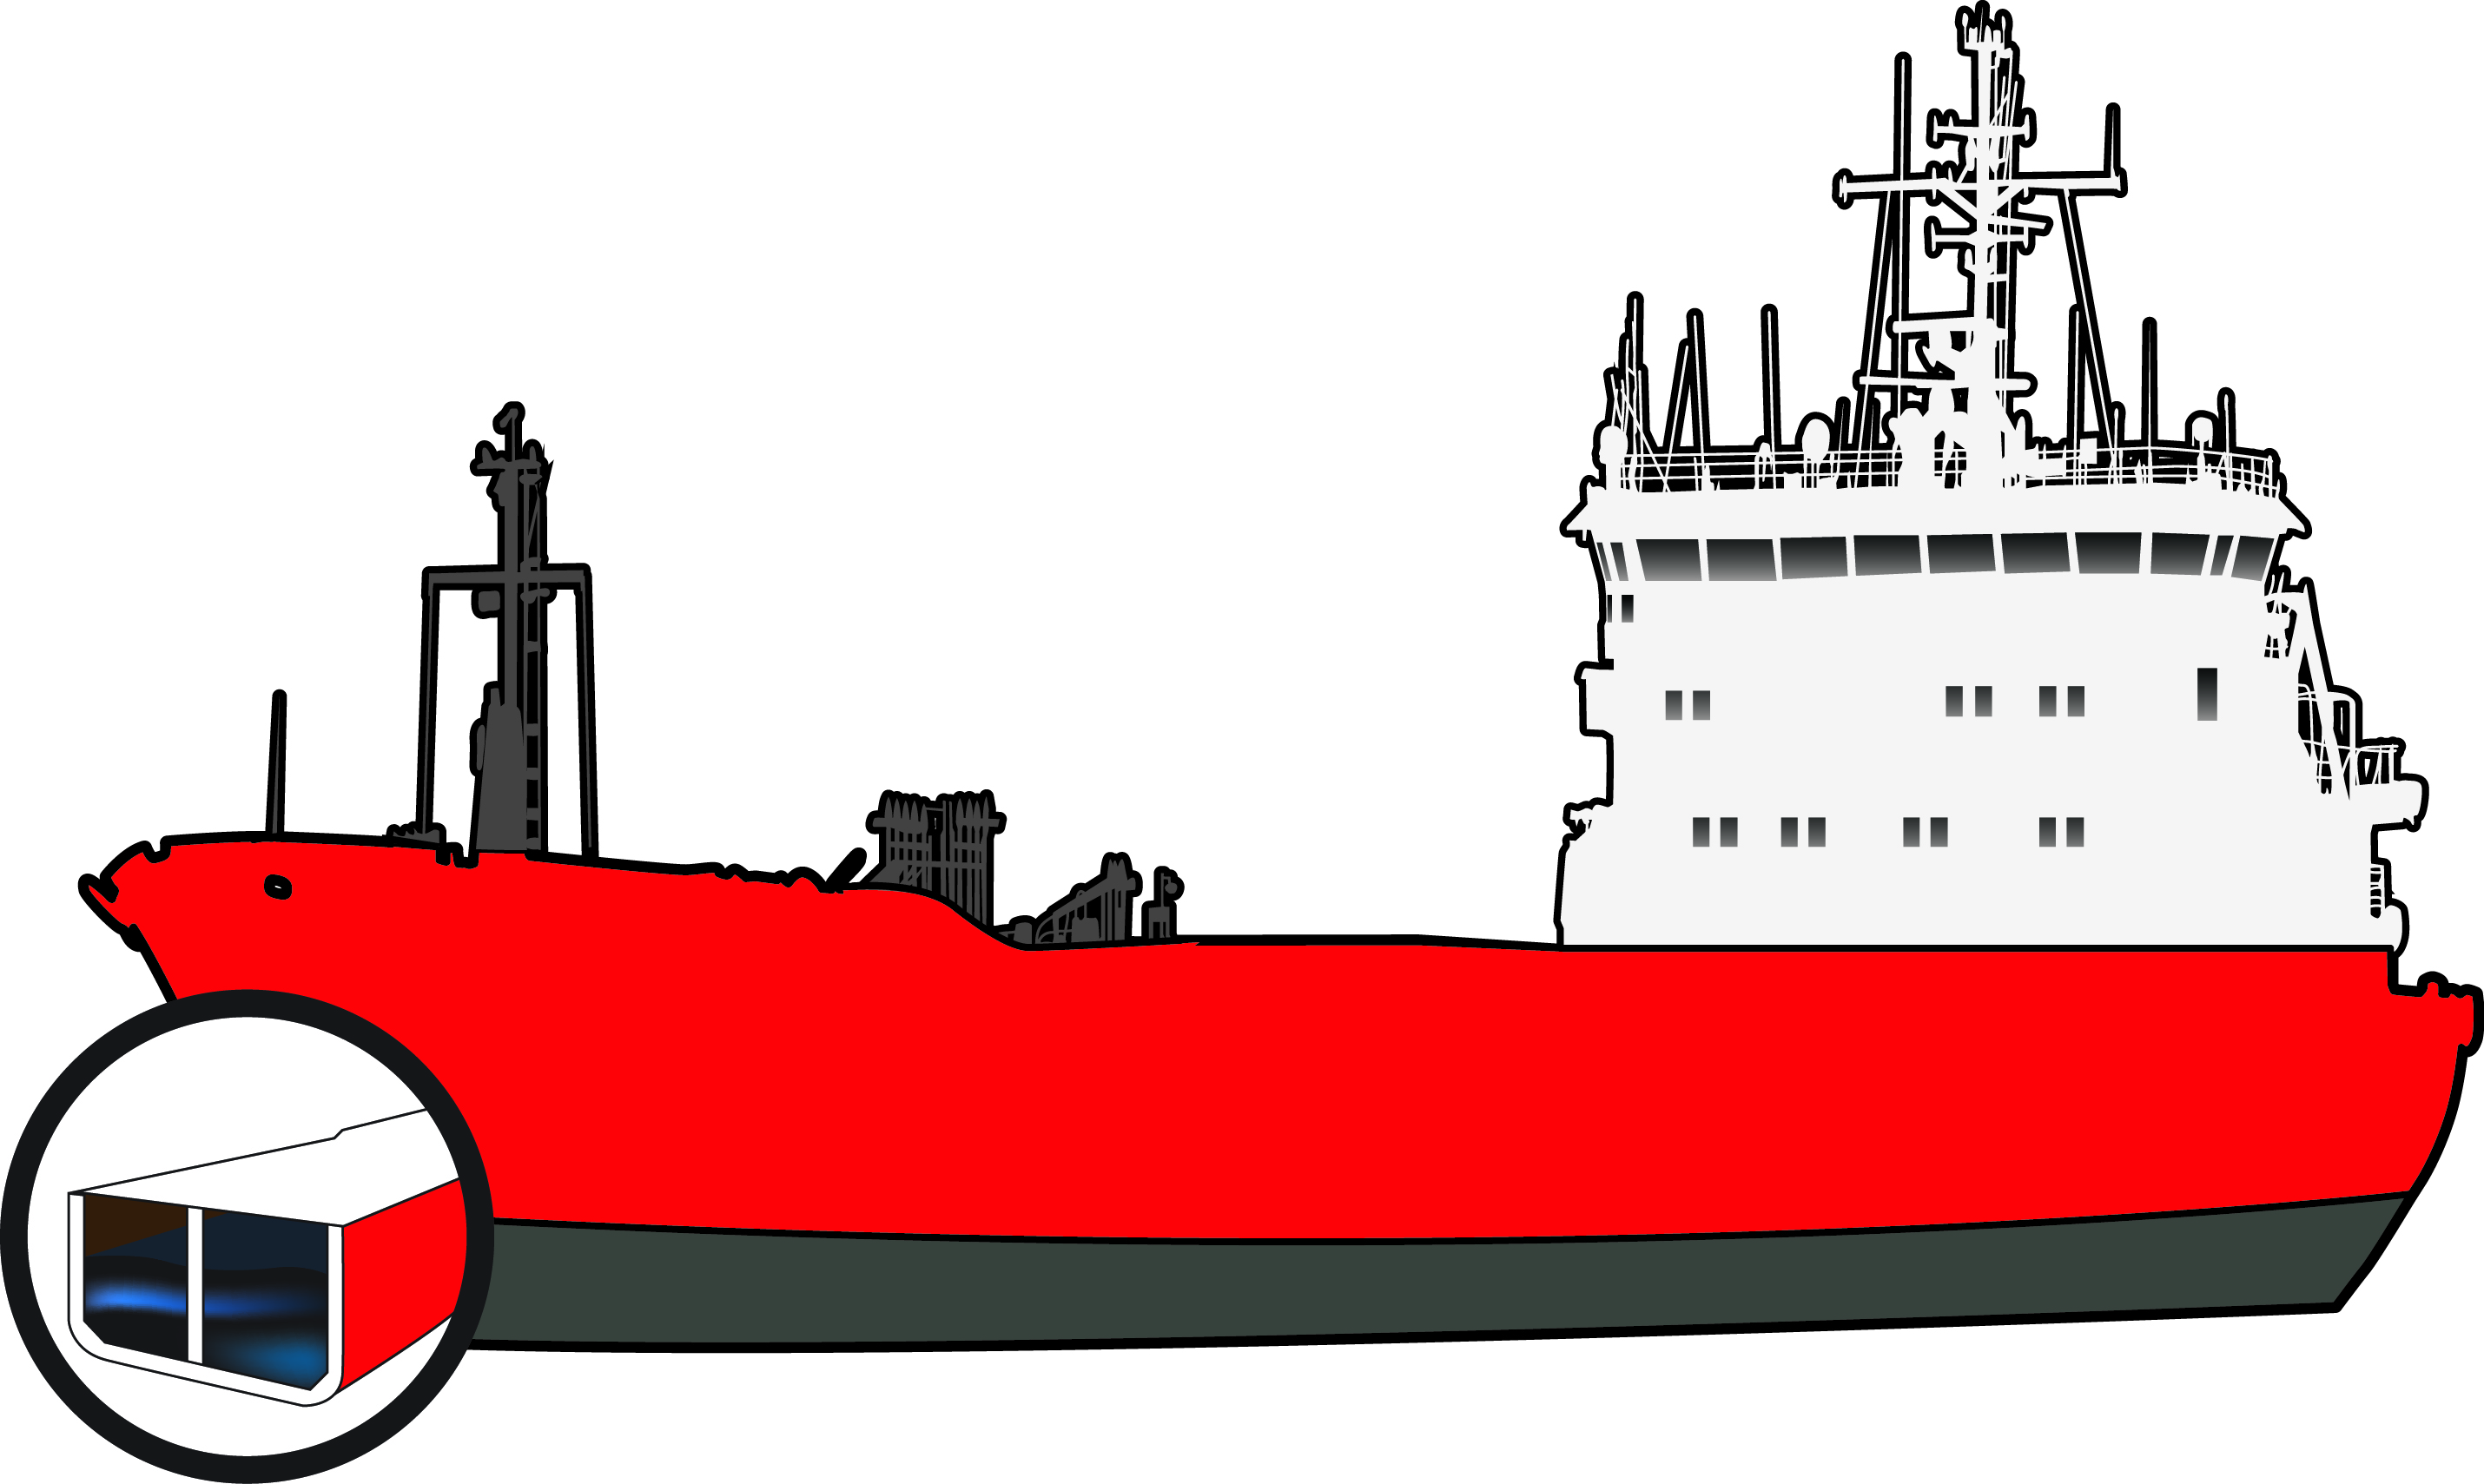 Illustration of a double hull